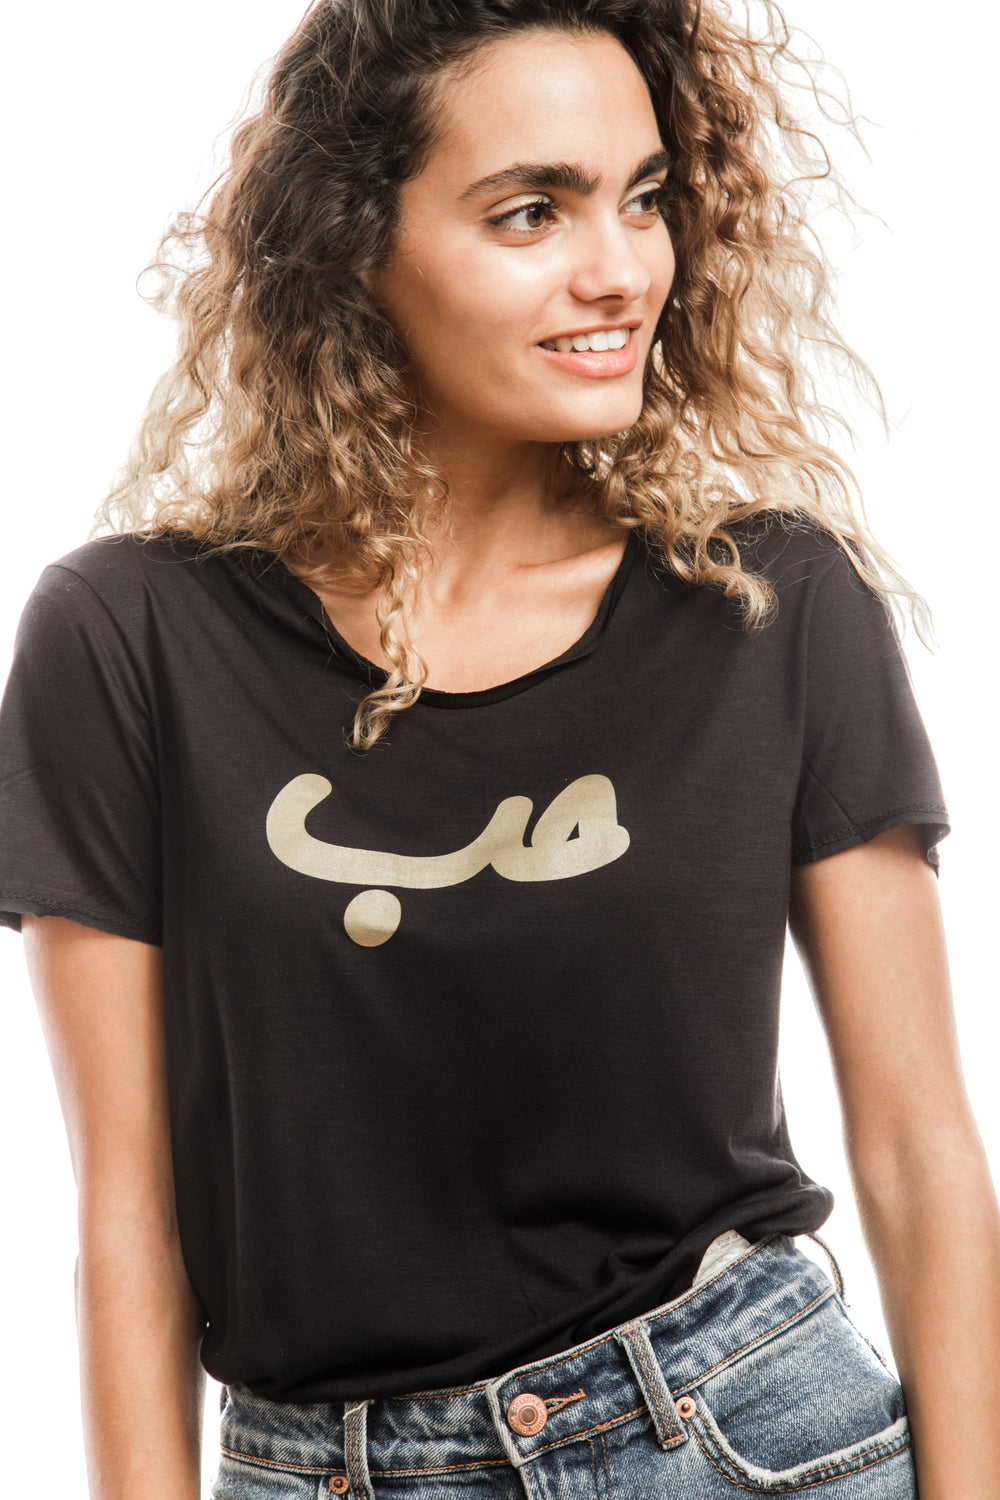 Young adult female wearing black T-shirt with Hobb written in Arabic حب and printed in gold silkscreen in the center of the T-shirt.